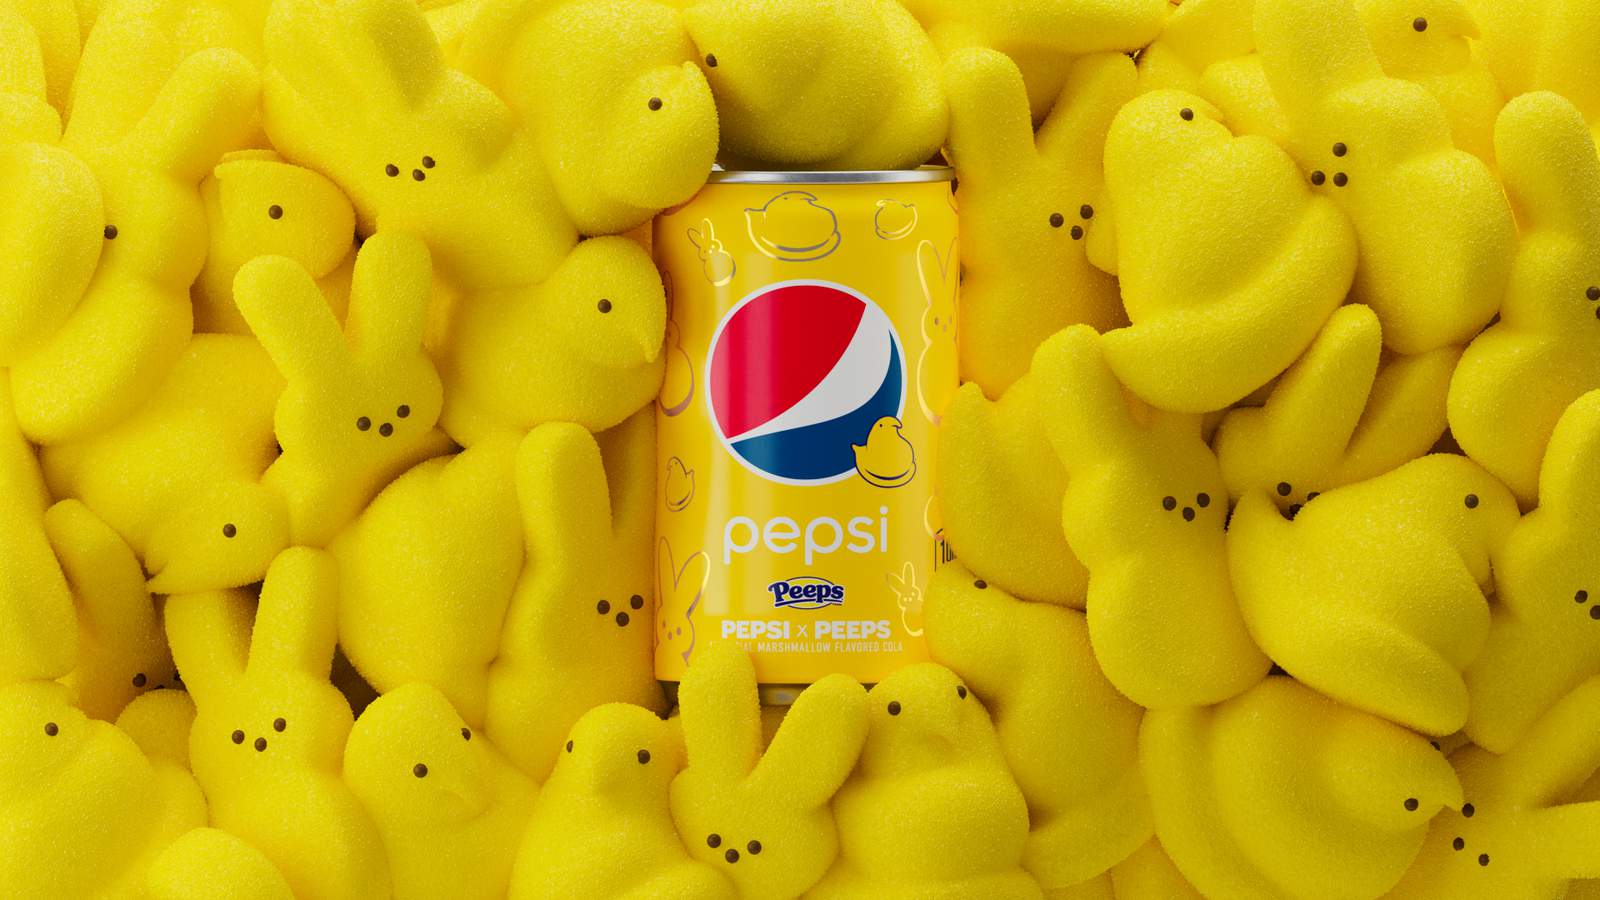 Peeps Pepsi is now a thing